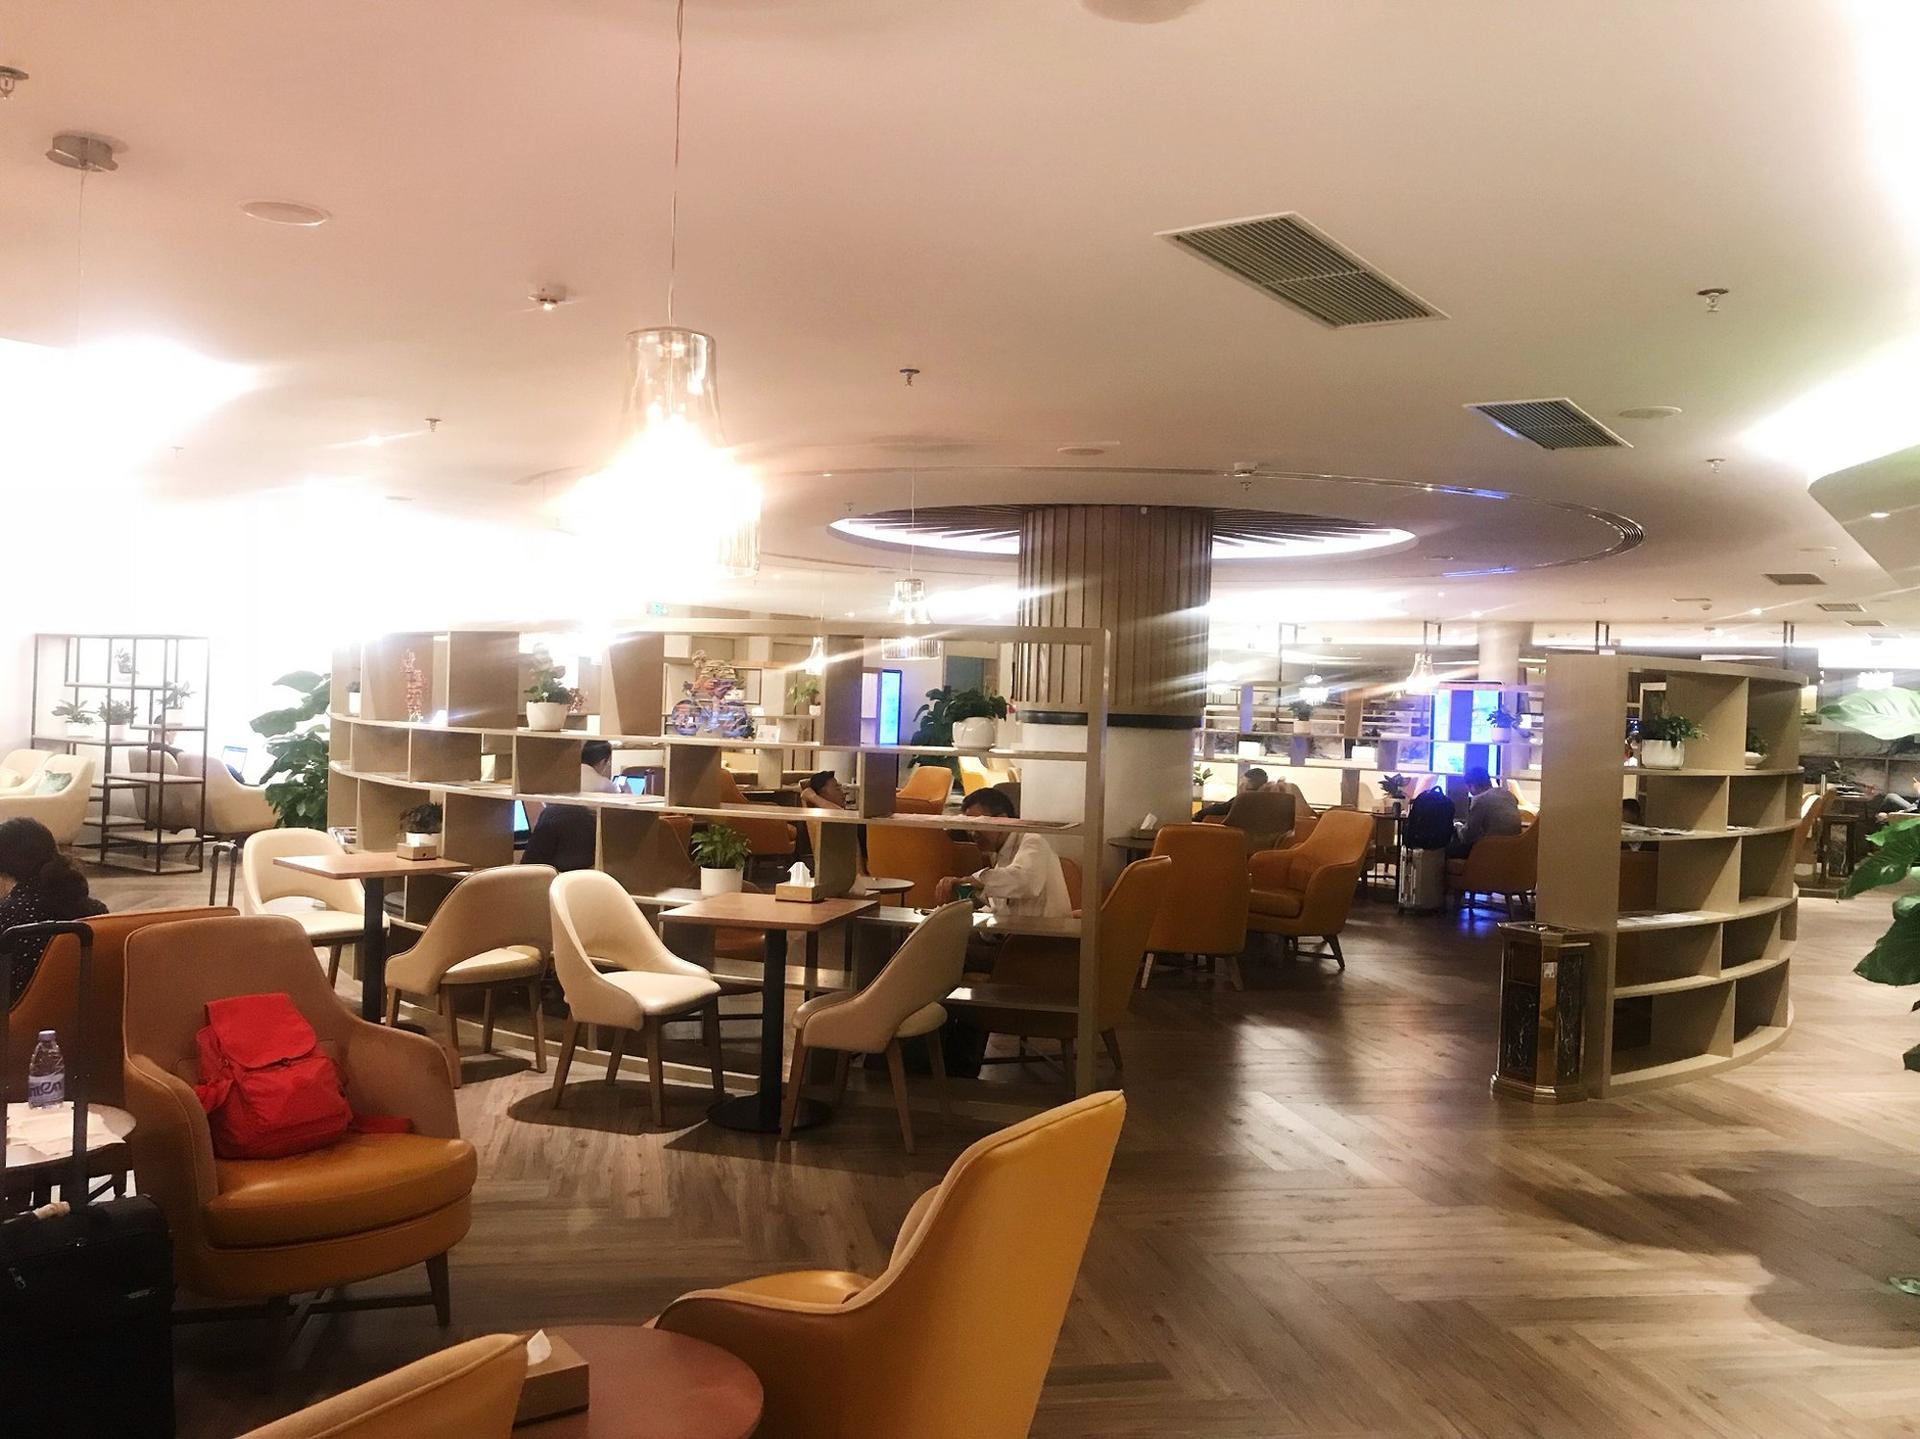 Shenzhen Airport First & Business Class Lounge (Joyee 2) image 2 of 9